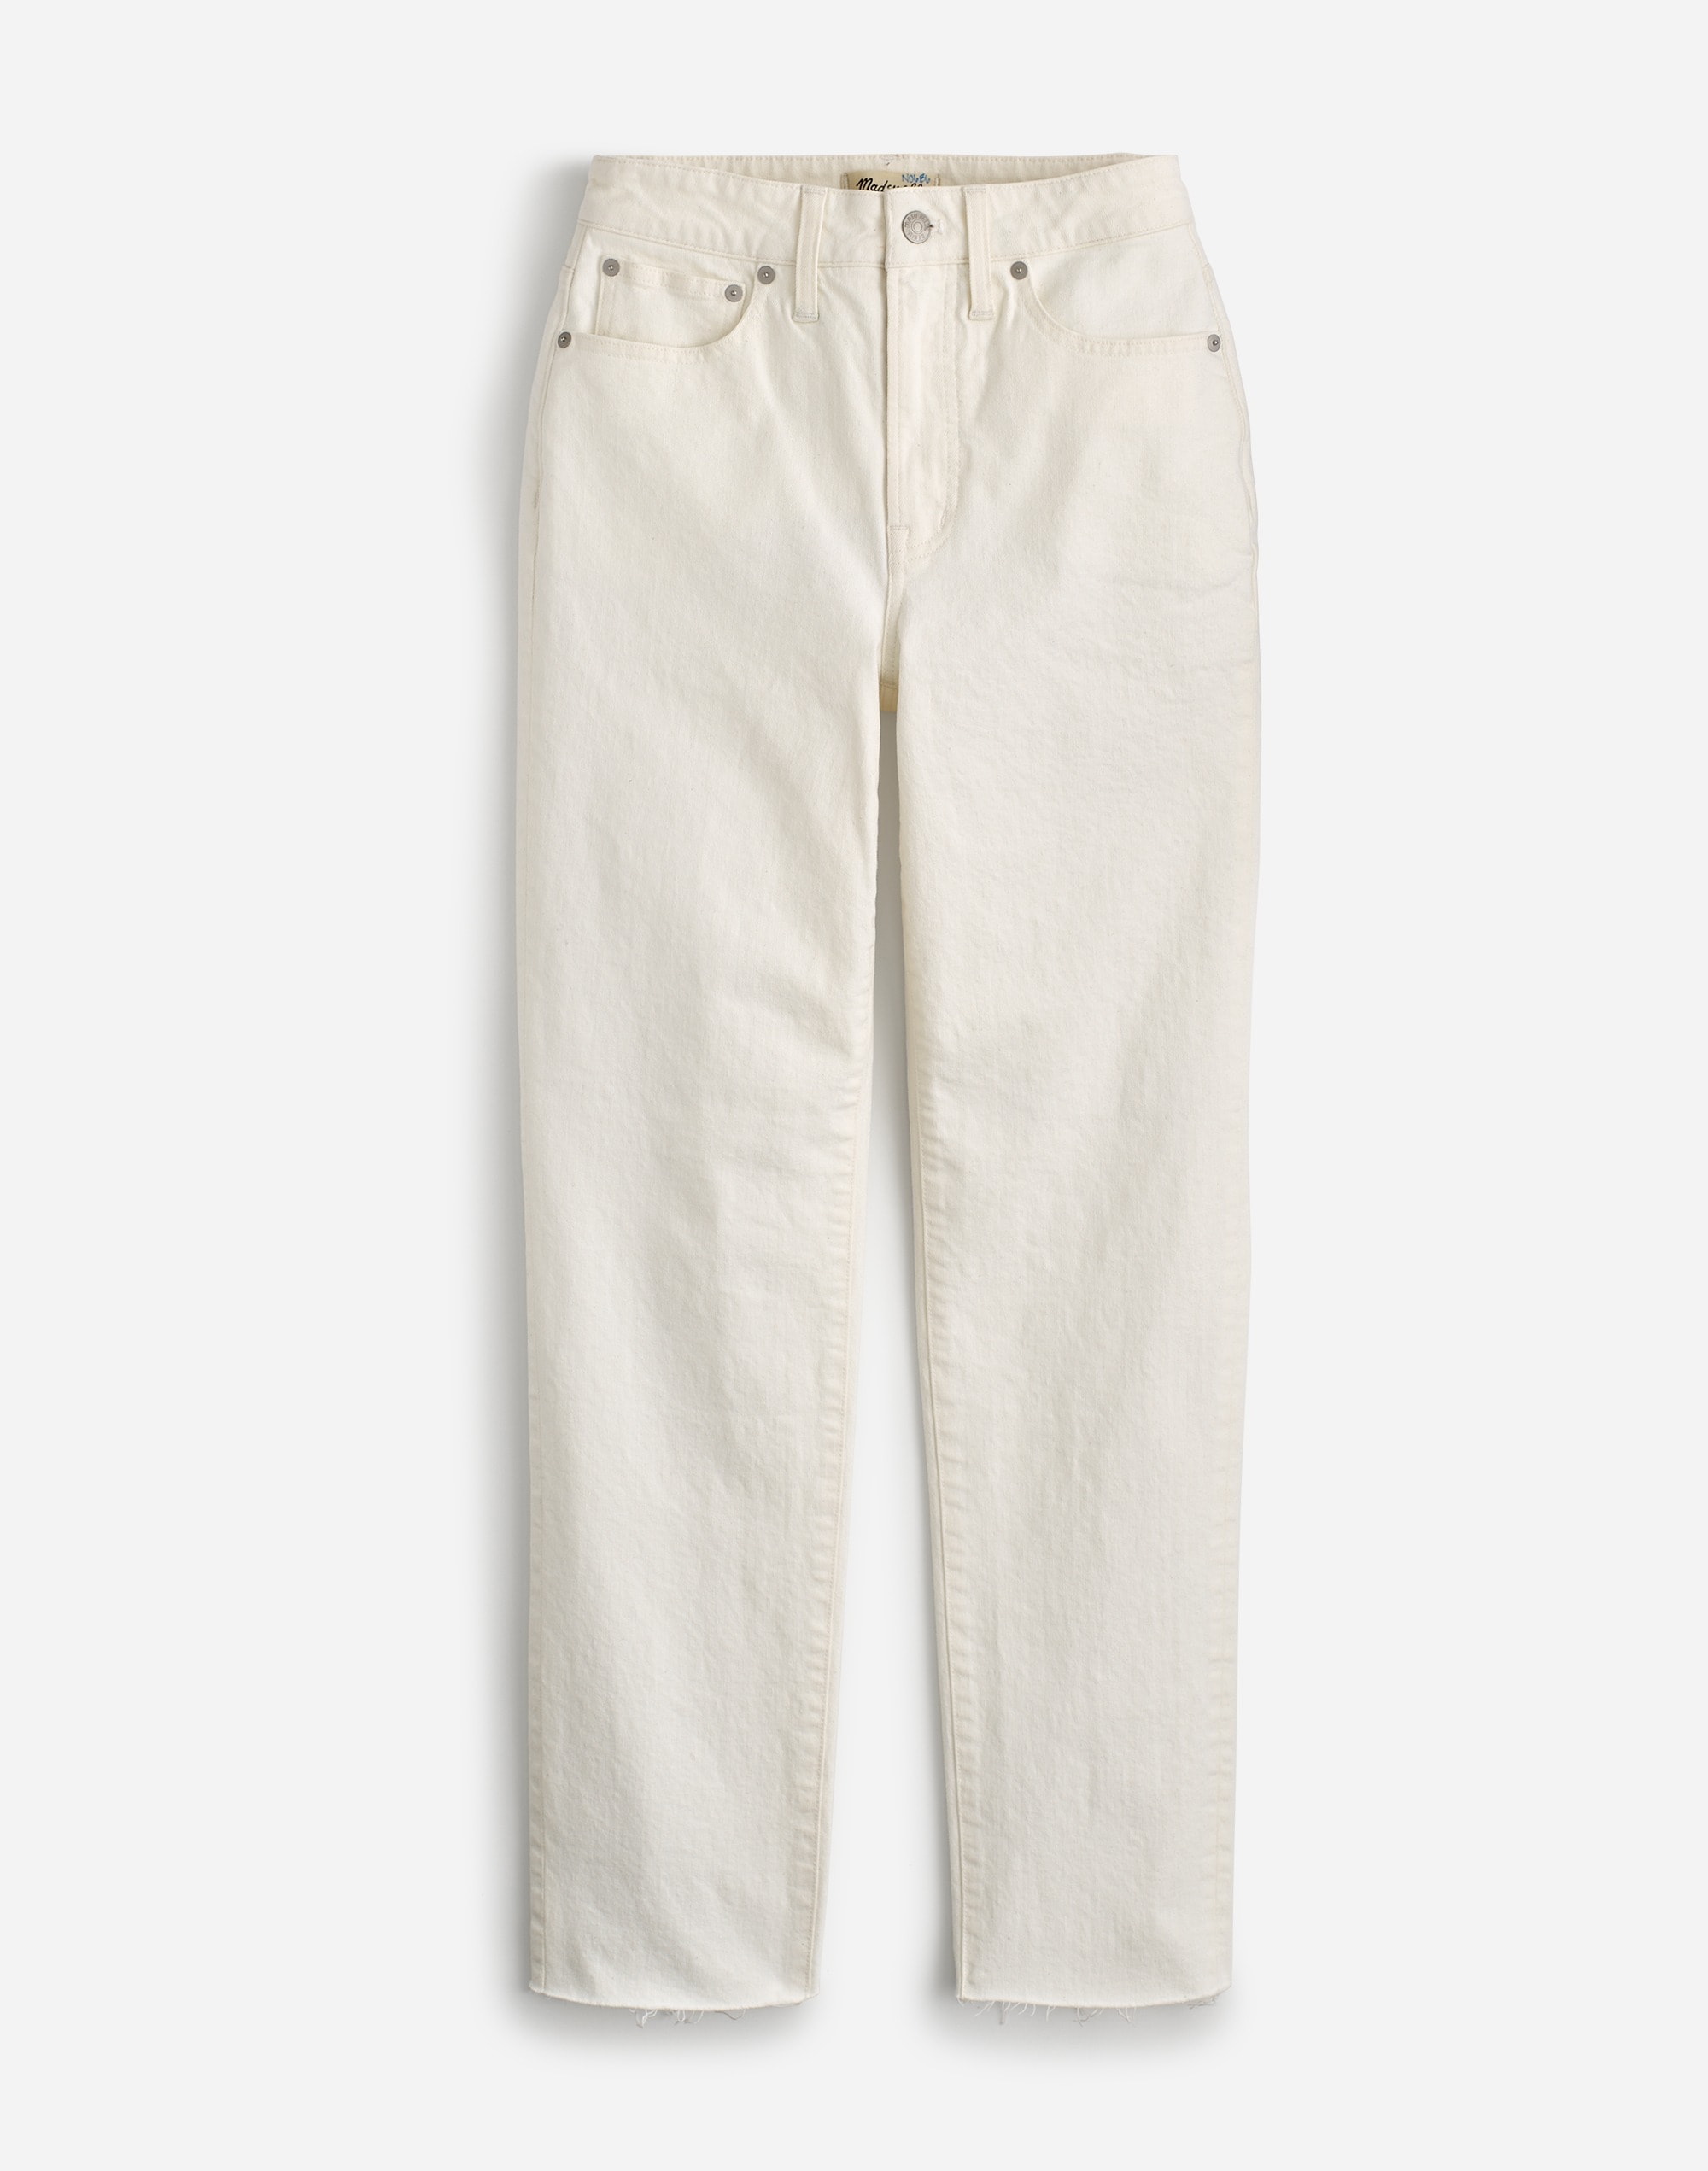 The Tall Perfect Vintage Jean | Madewell